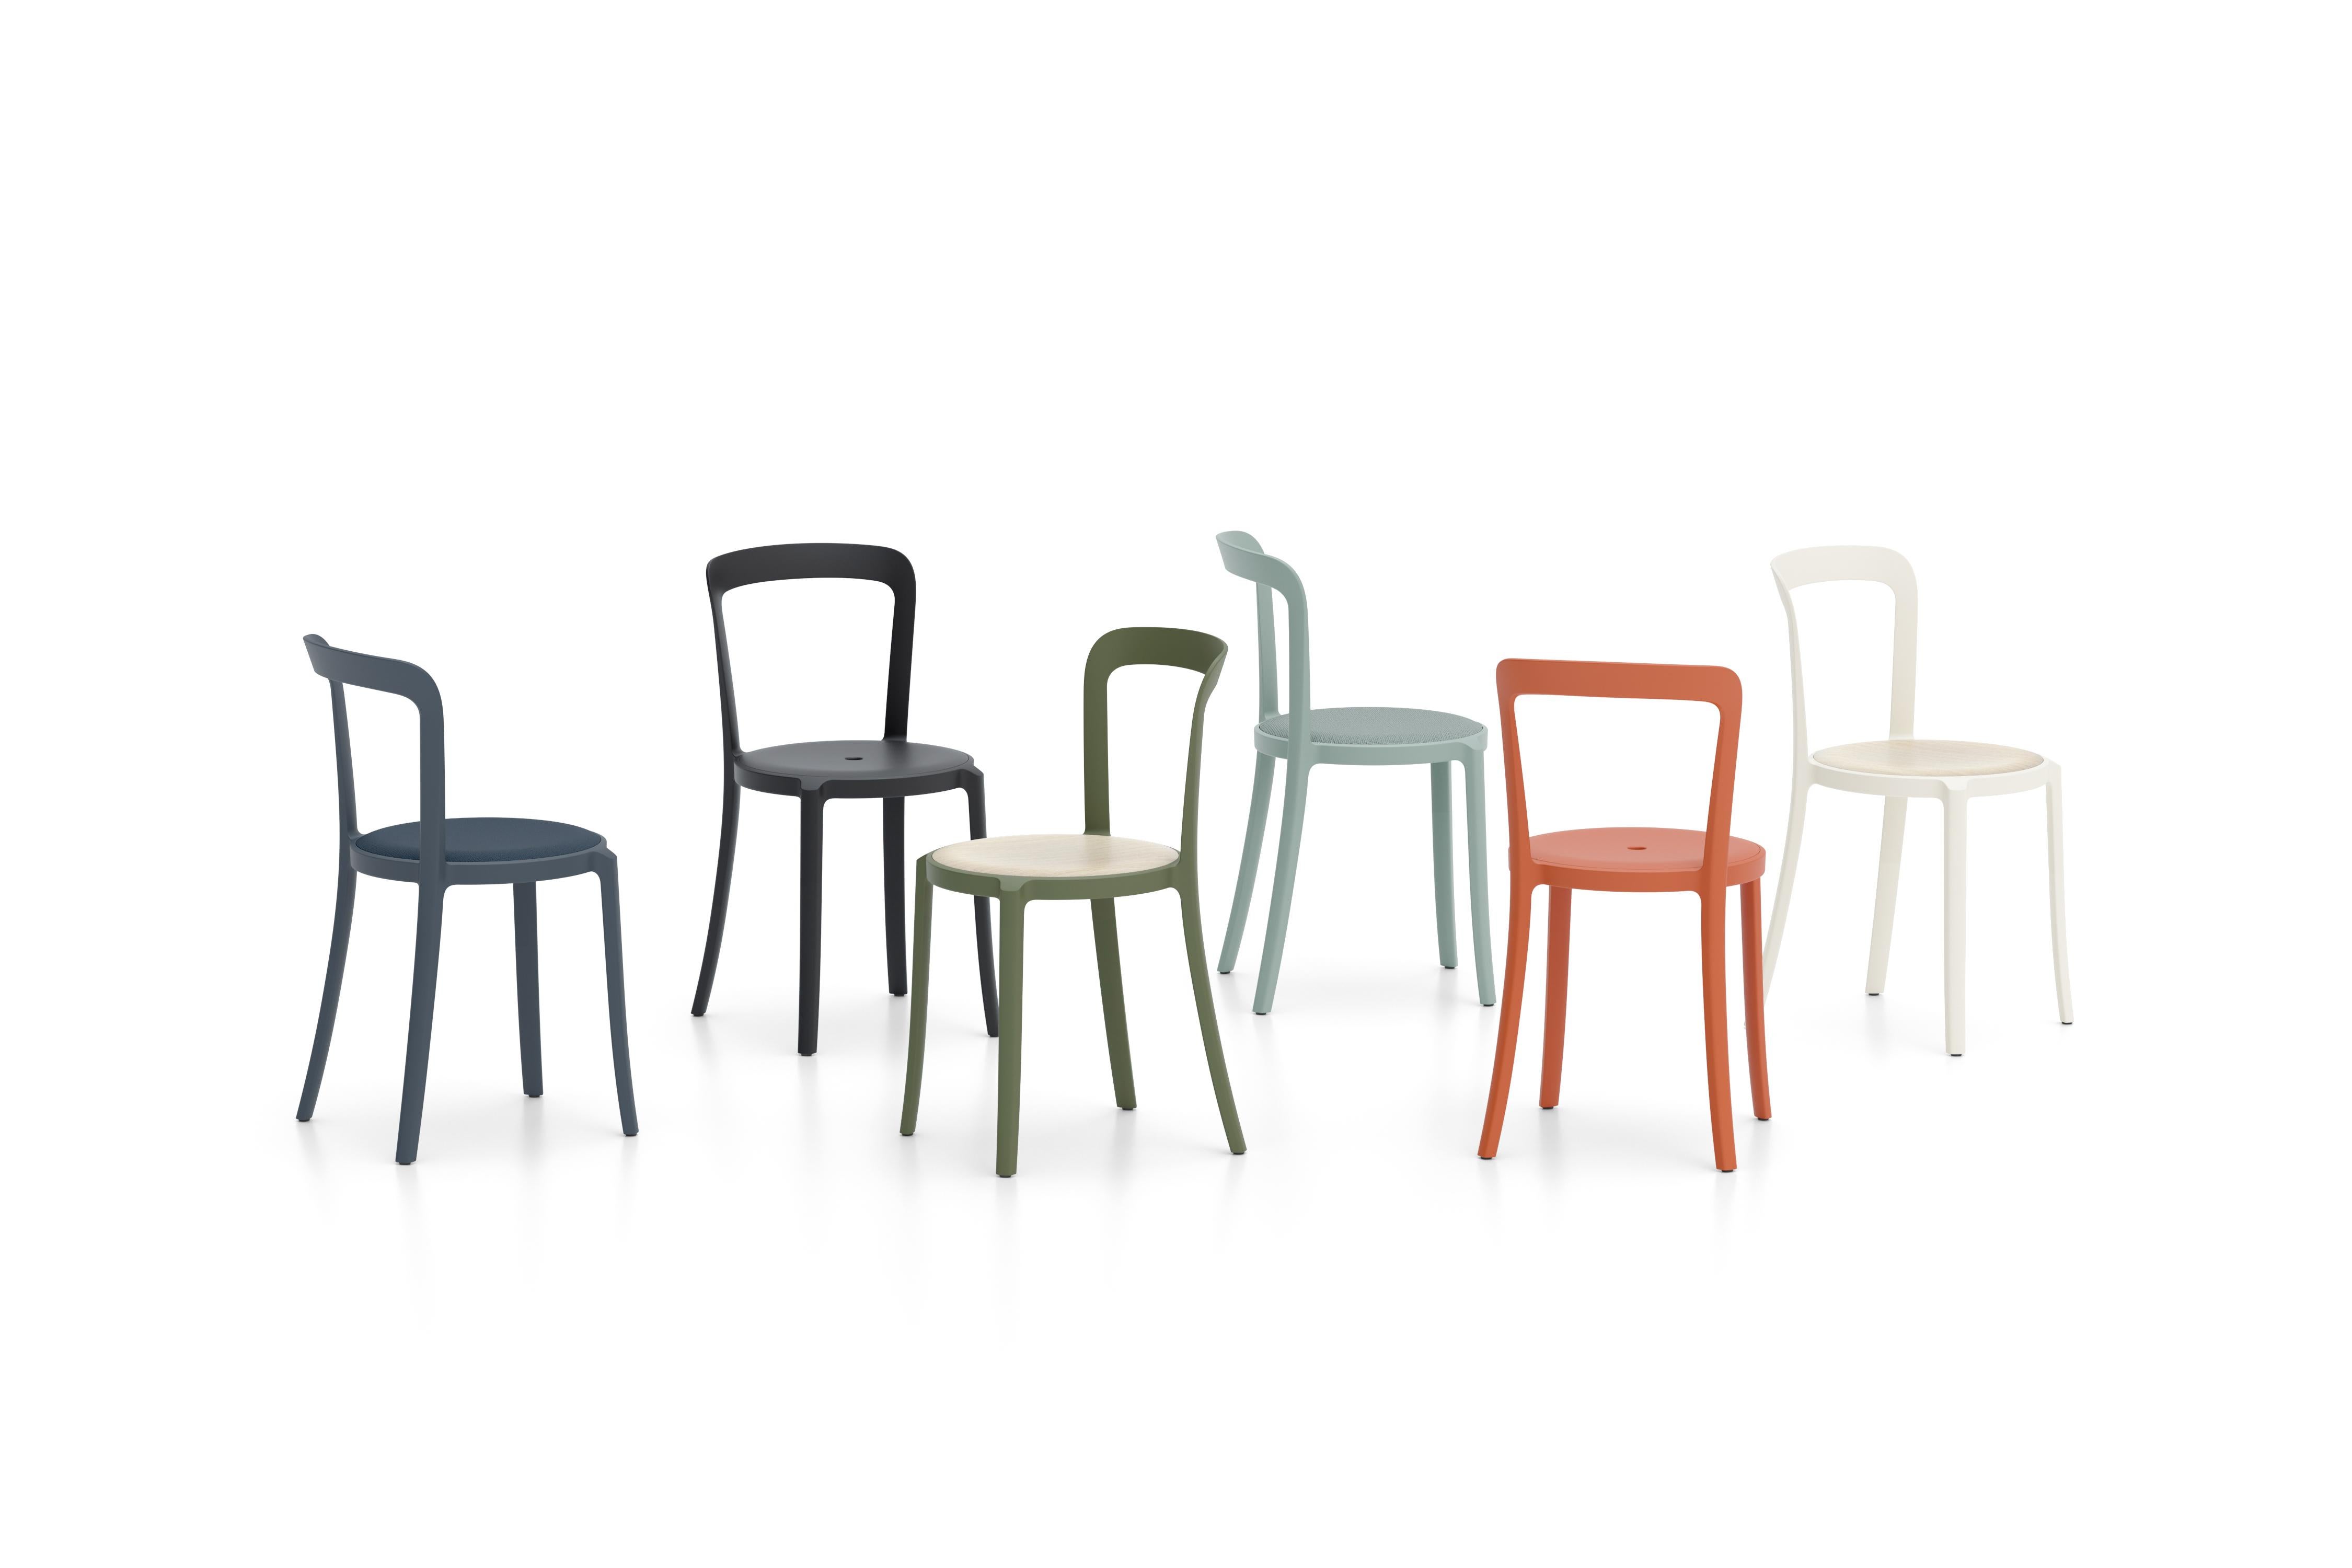 The On & On Collection by Barber & Osgerby for Emeco breaks new ground with a circular way of thinking, combining longevity of design, durability, and the use of recycled materials that can be recycled again – on and on.
Made and remade in USA from